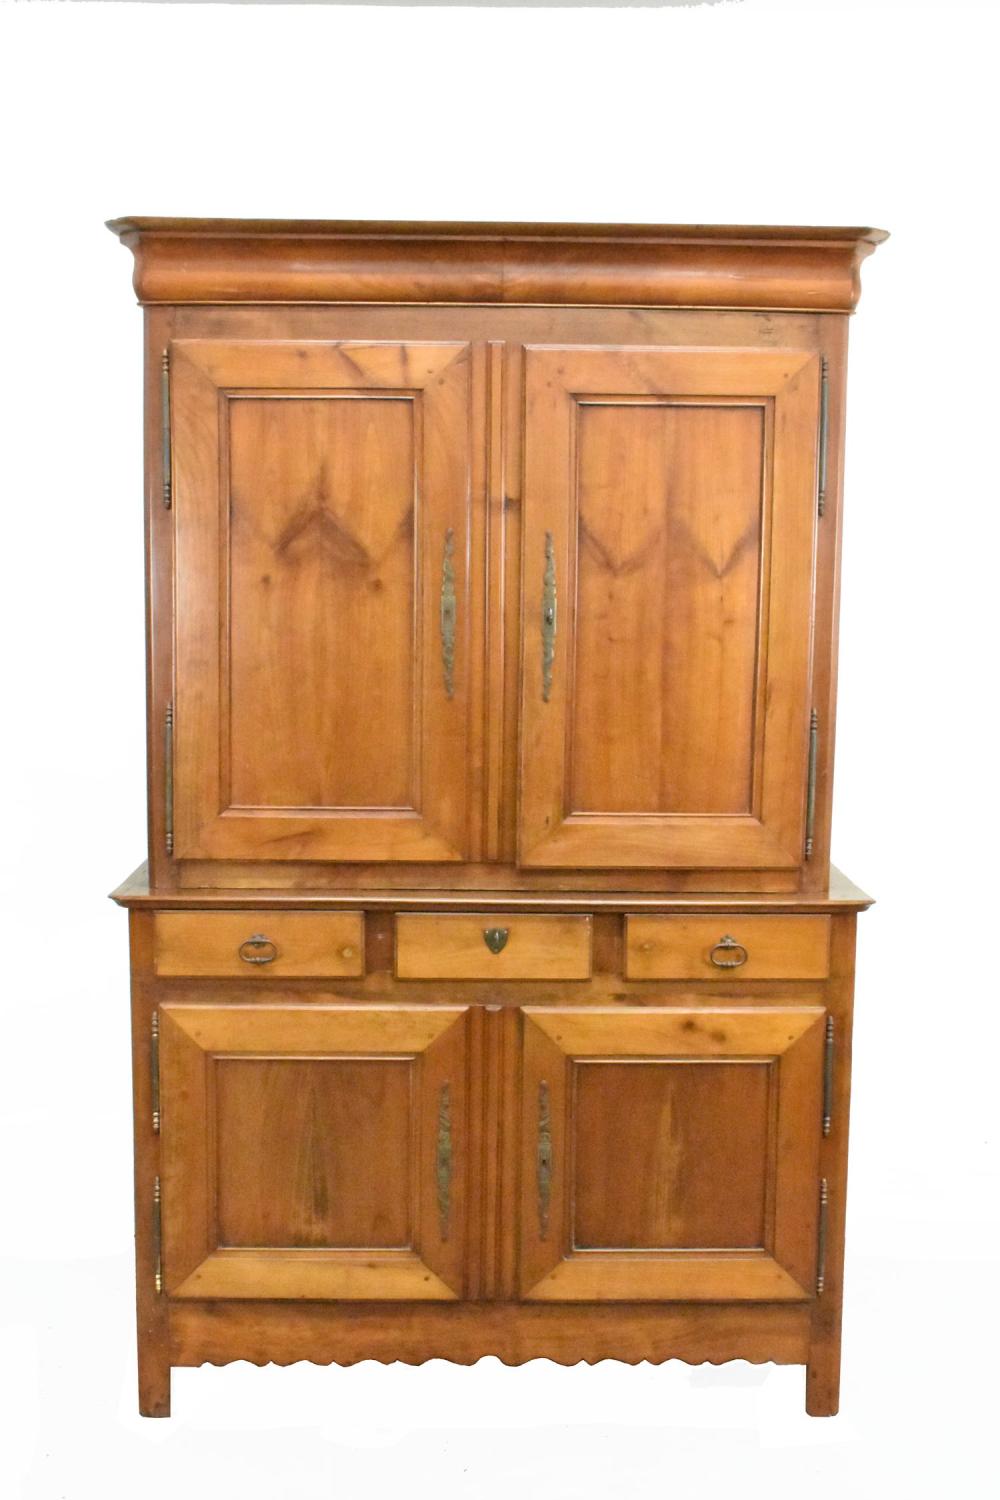 ANTIQUE FRENCH PROVINCIAL BUFFET 2f8800